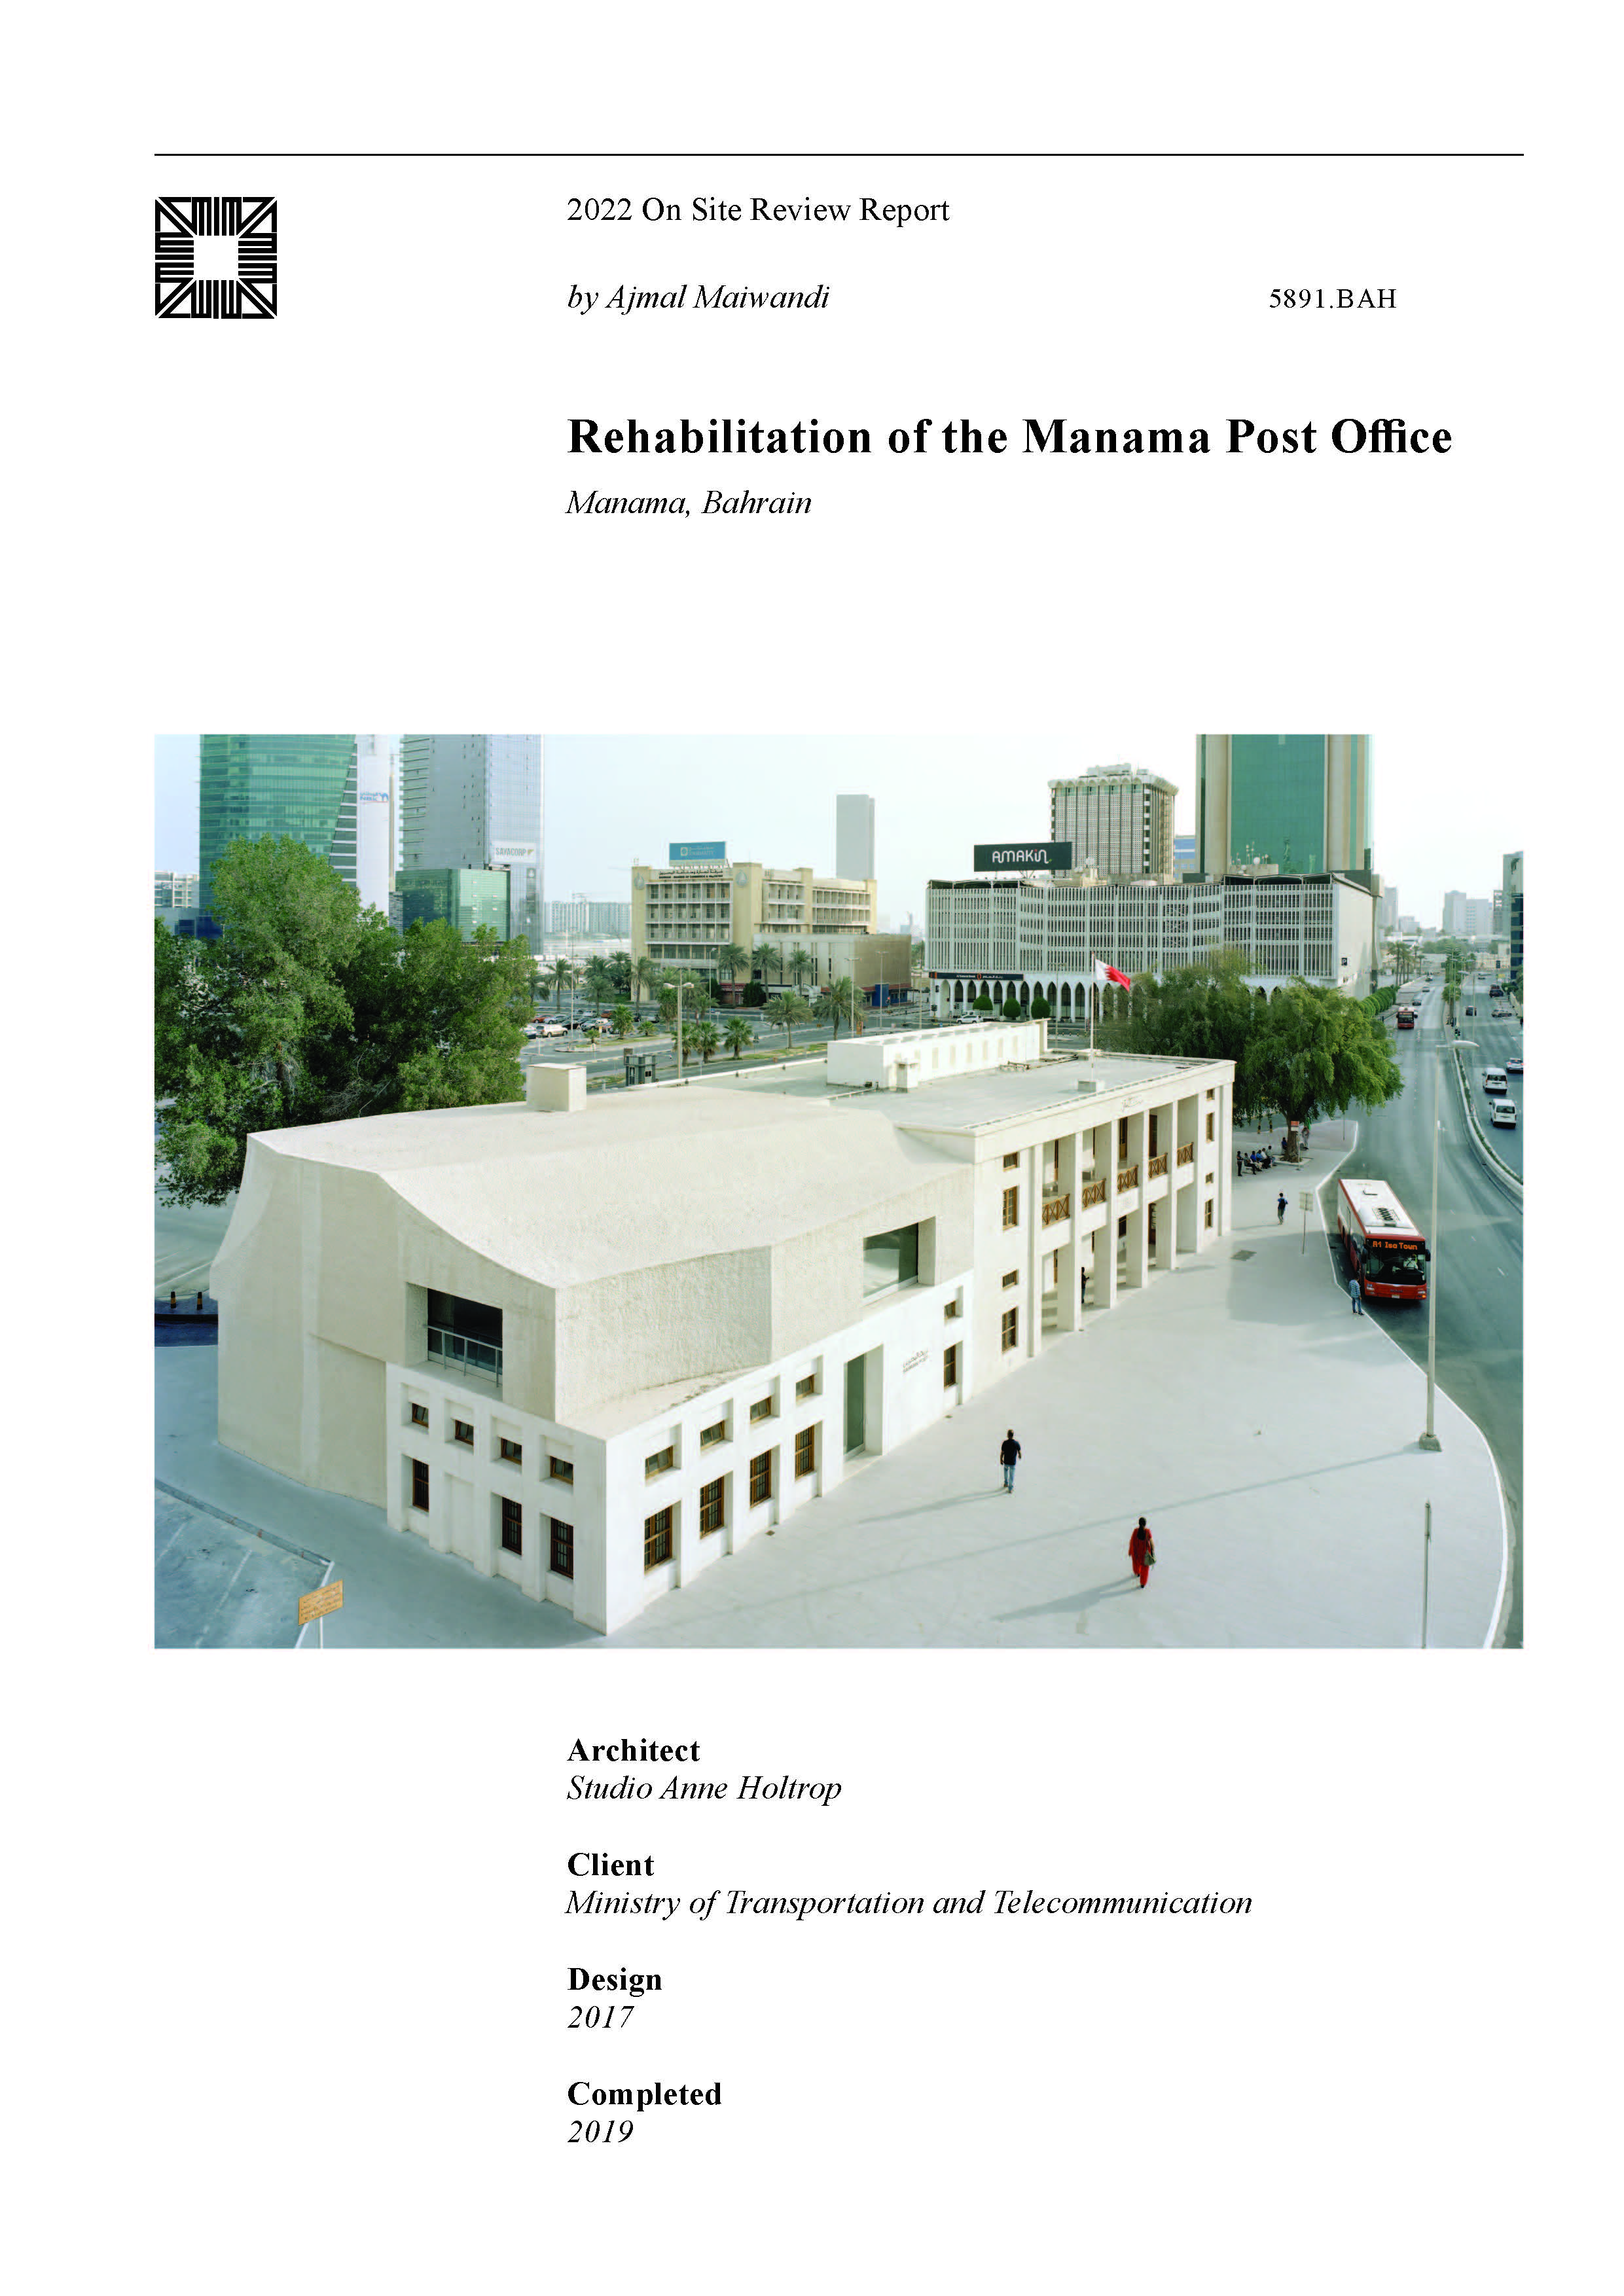 Rehabilitation of the Manama Post Office On-site Review Report